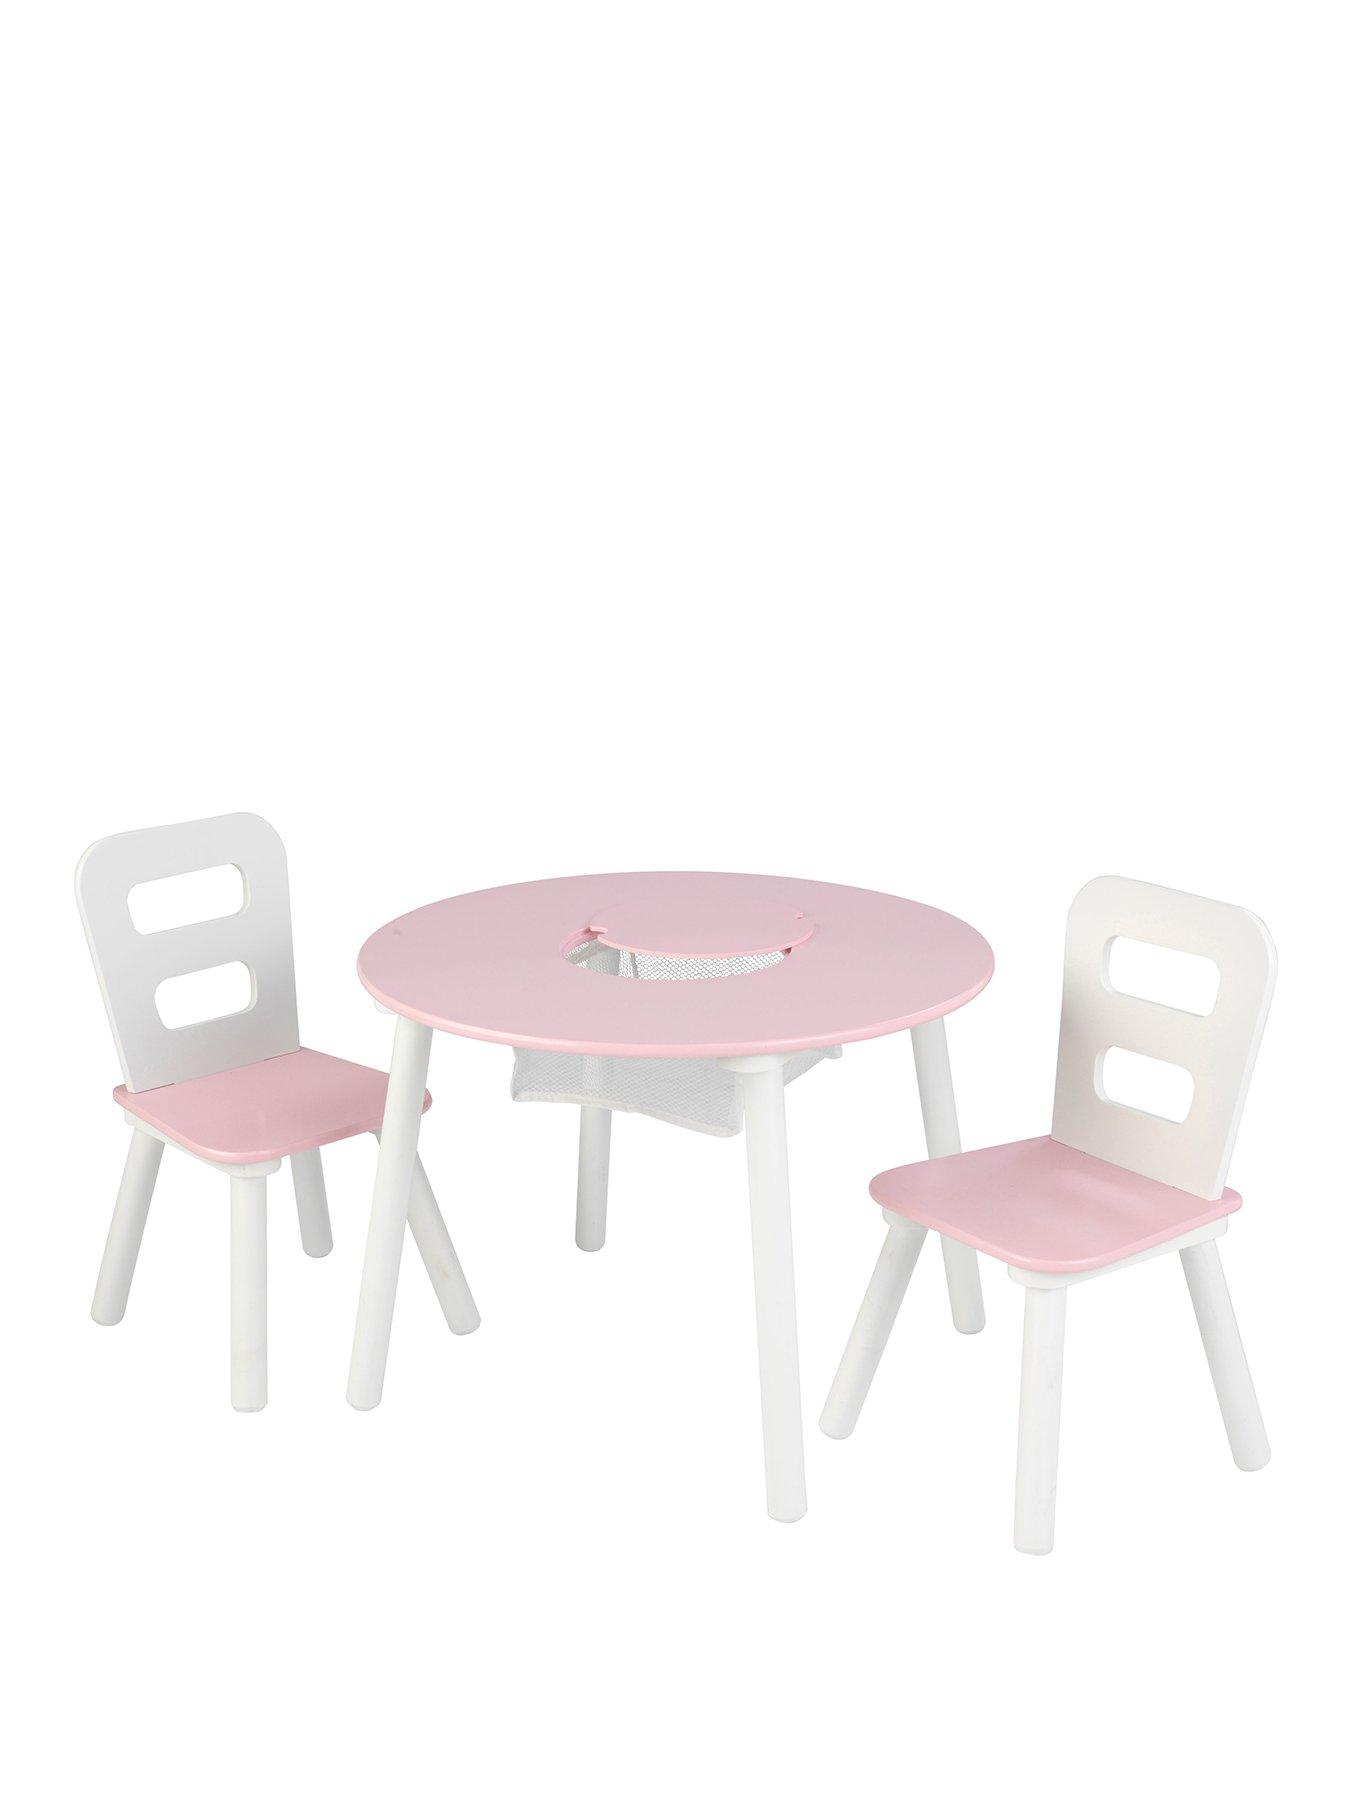 kidkraft table and chairs grey